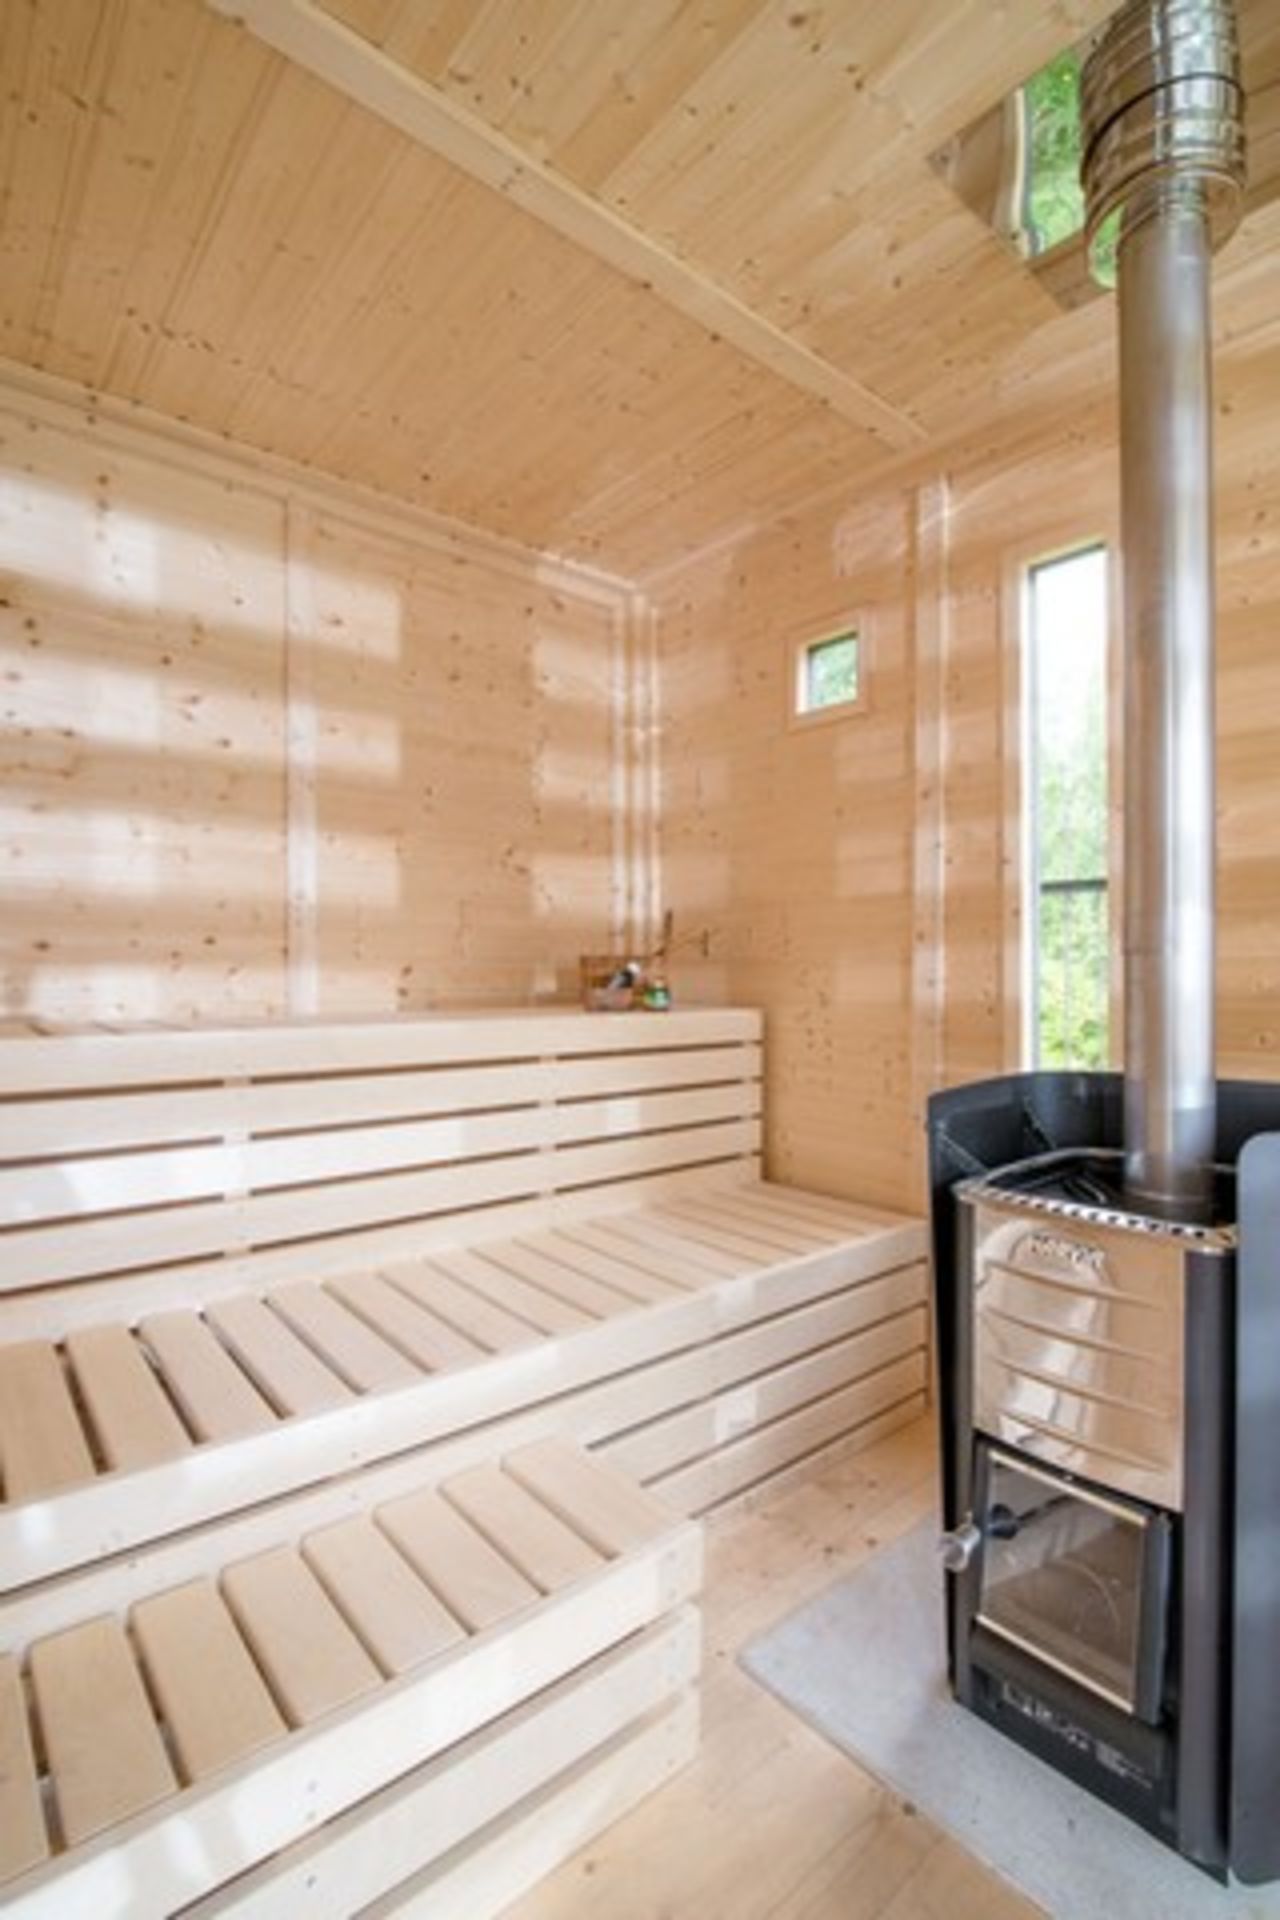 + VAT Brand New 4 x 3m Sauna Cube - 3 Sunscreen Walls With Tempered Glass - 4 Insulated Wall Panels - Image 2 of 6